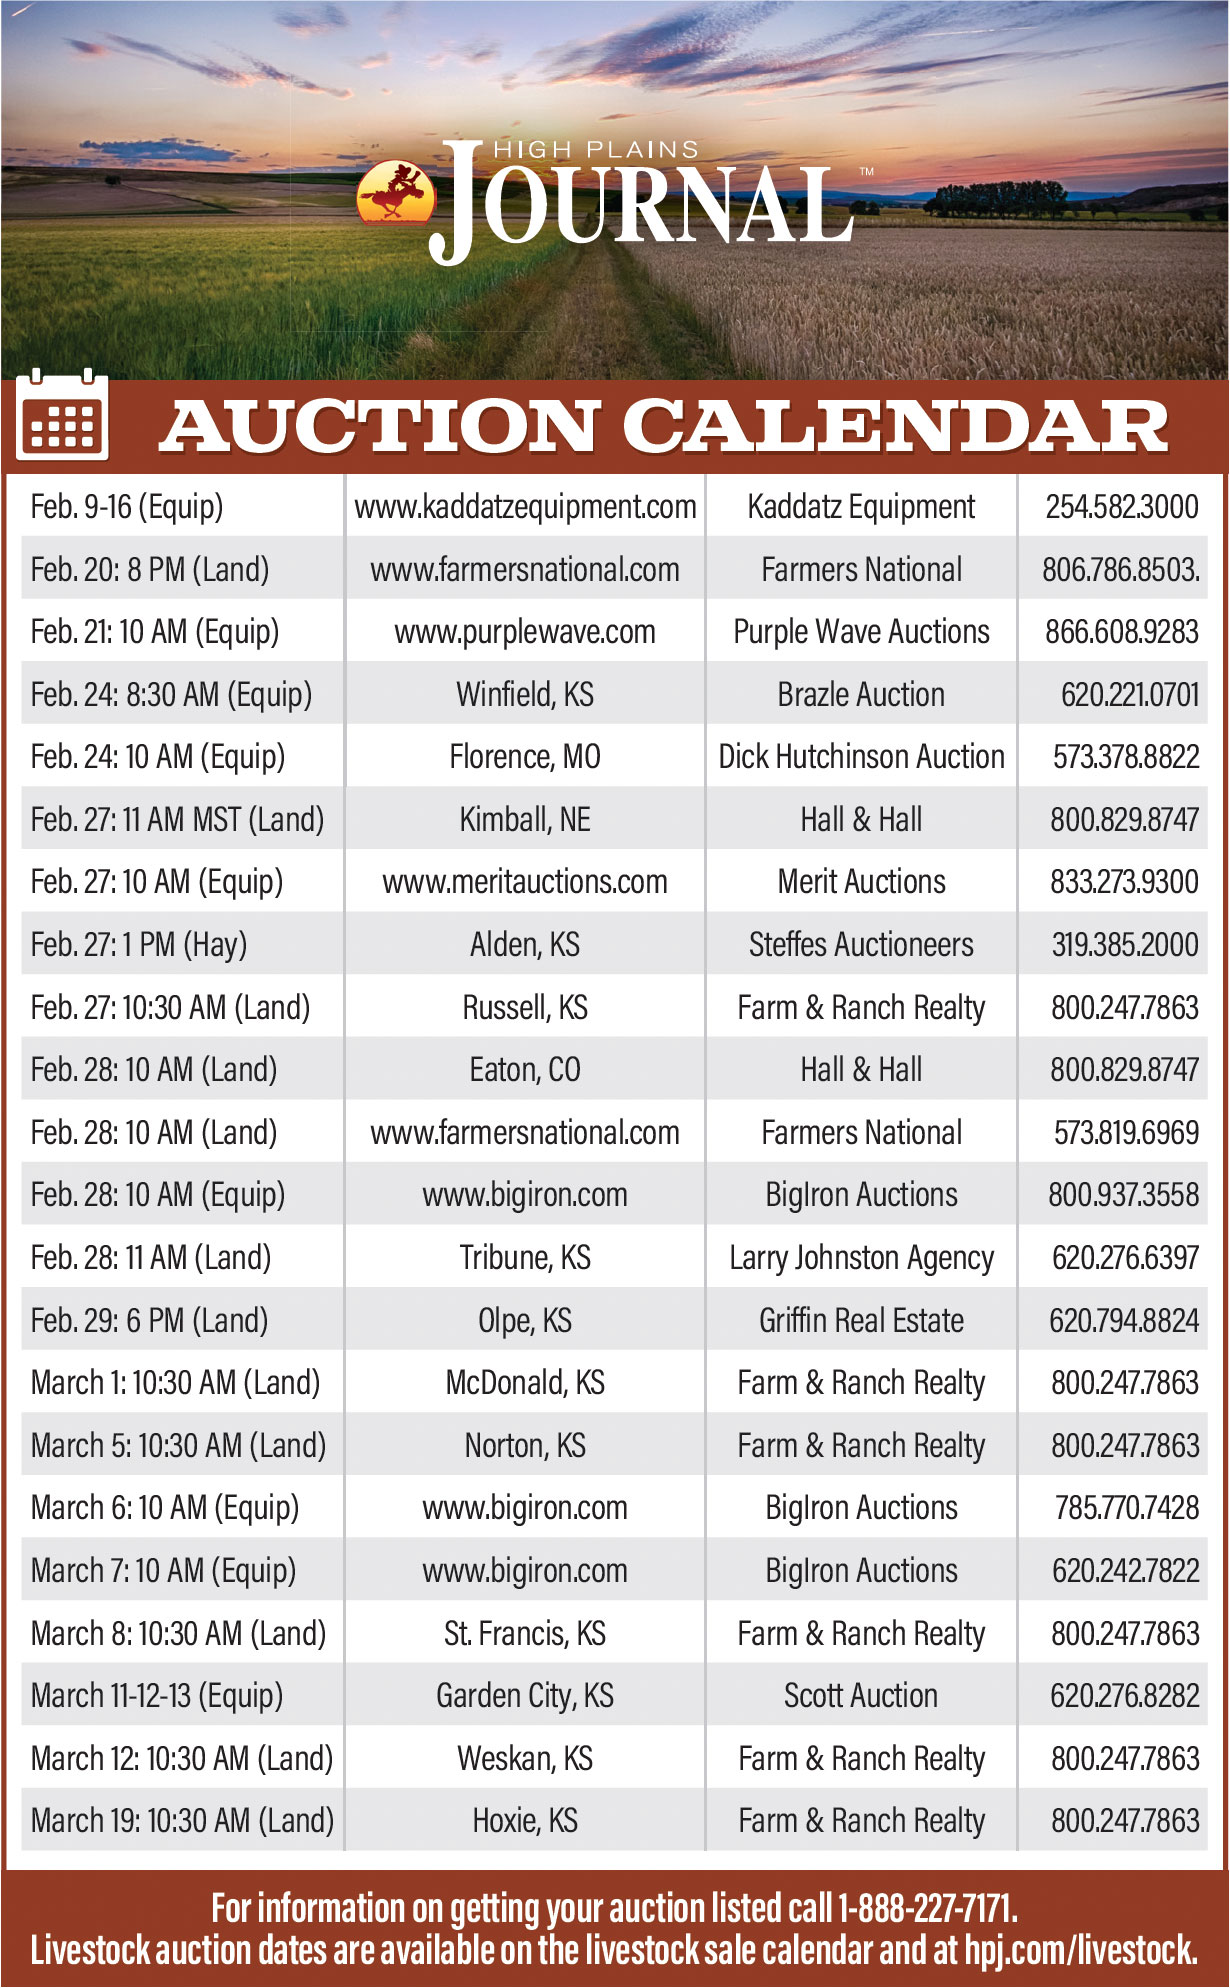 Upcoming Auctions - Merit Auctions